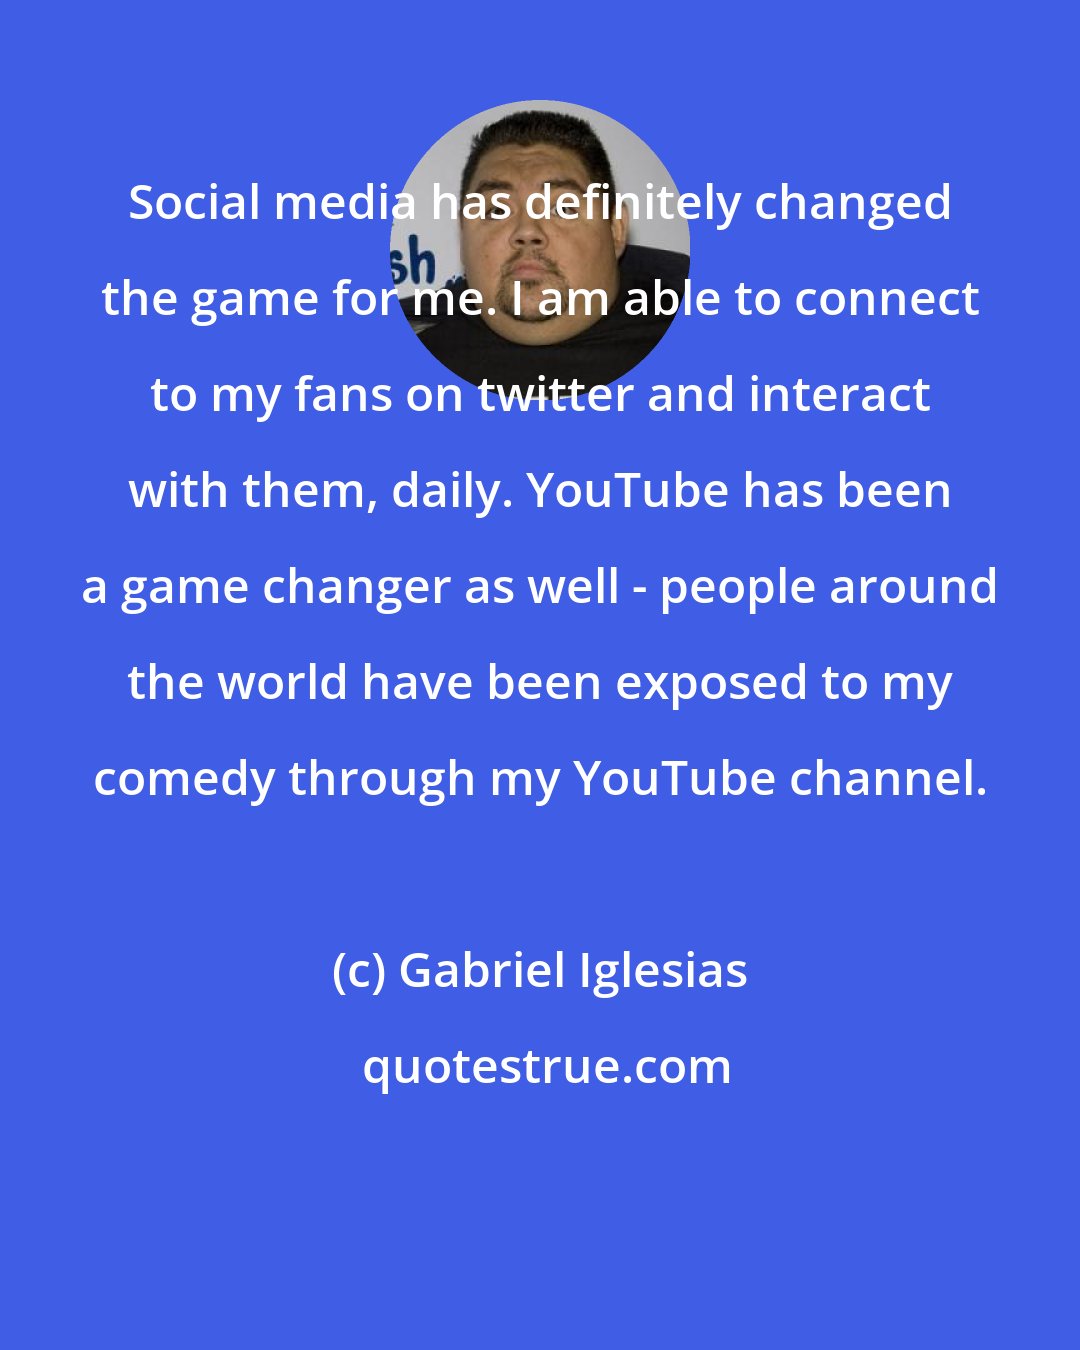 Gabriel Iglesias: Social media has definitely changed the game for me. I am able to connect to my fans on twitter and interact with them, daily. YouTube has been a game changer as well - people around the world have been exposed to my comedy through my YouTube channel.